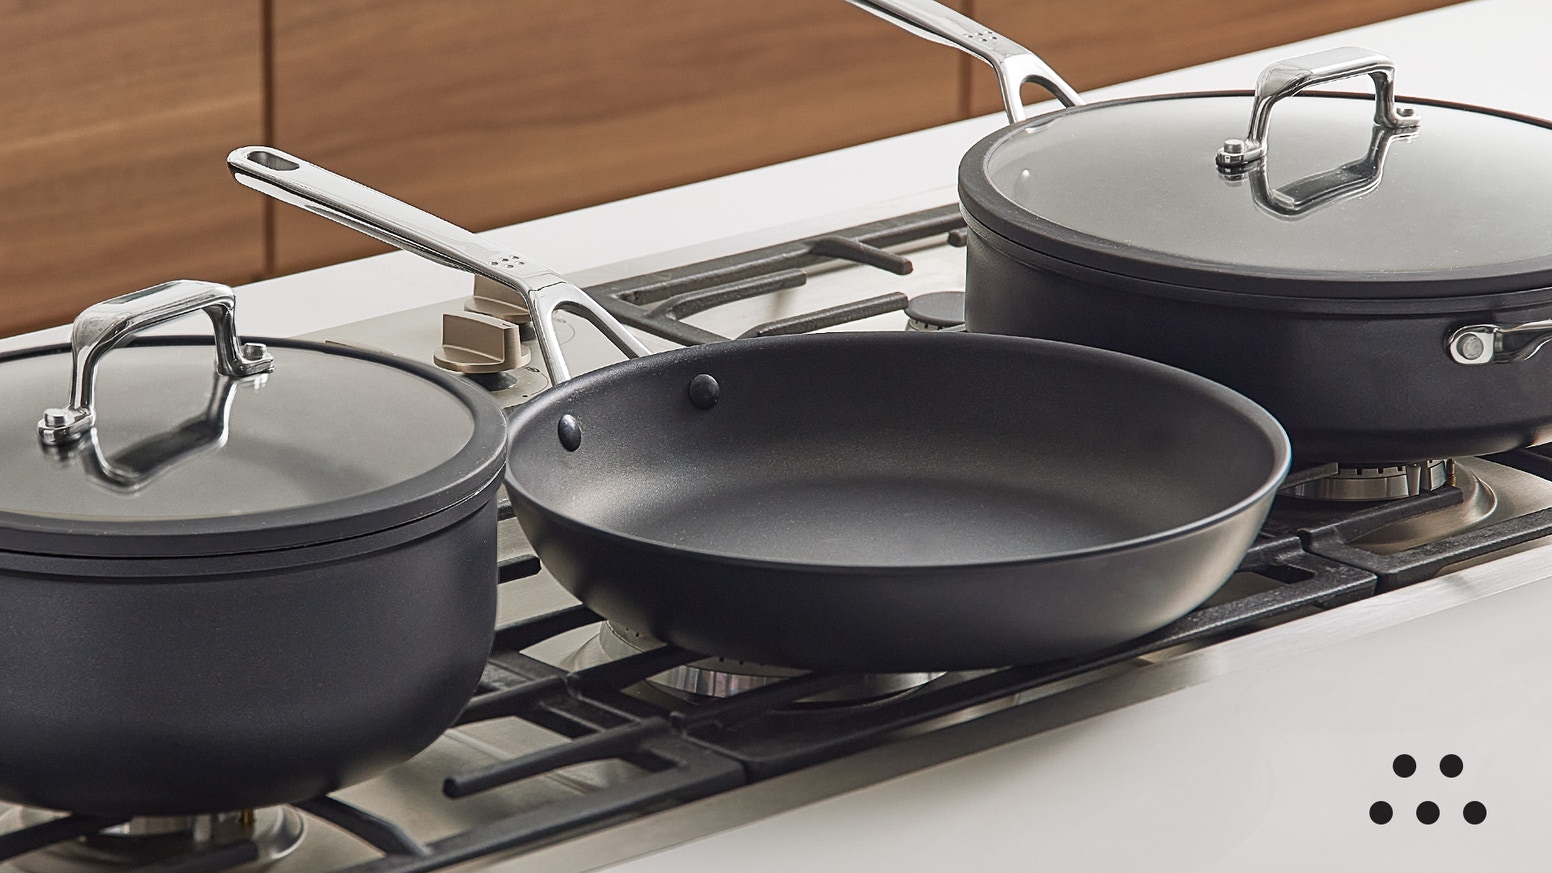 Misen's New Nonstick Cookware Collection Has So Many Great Picks